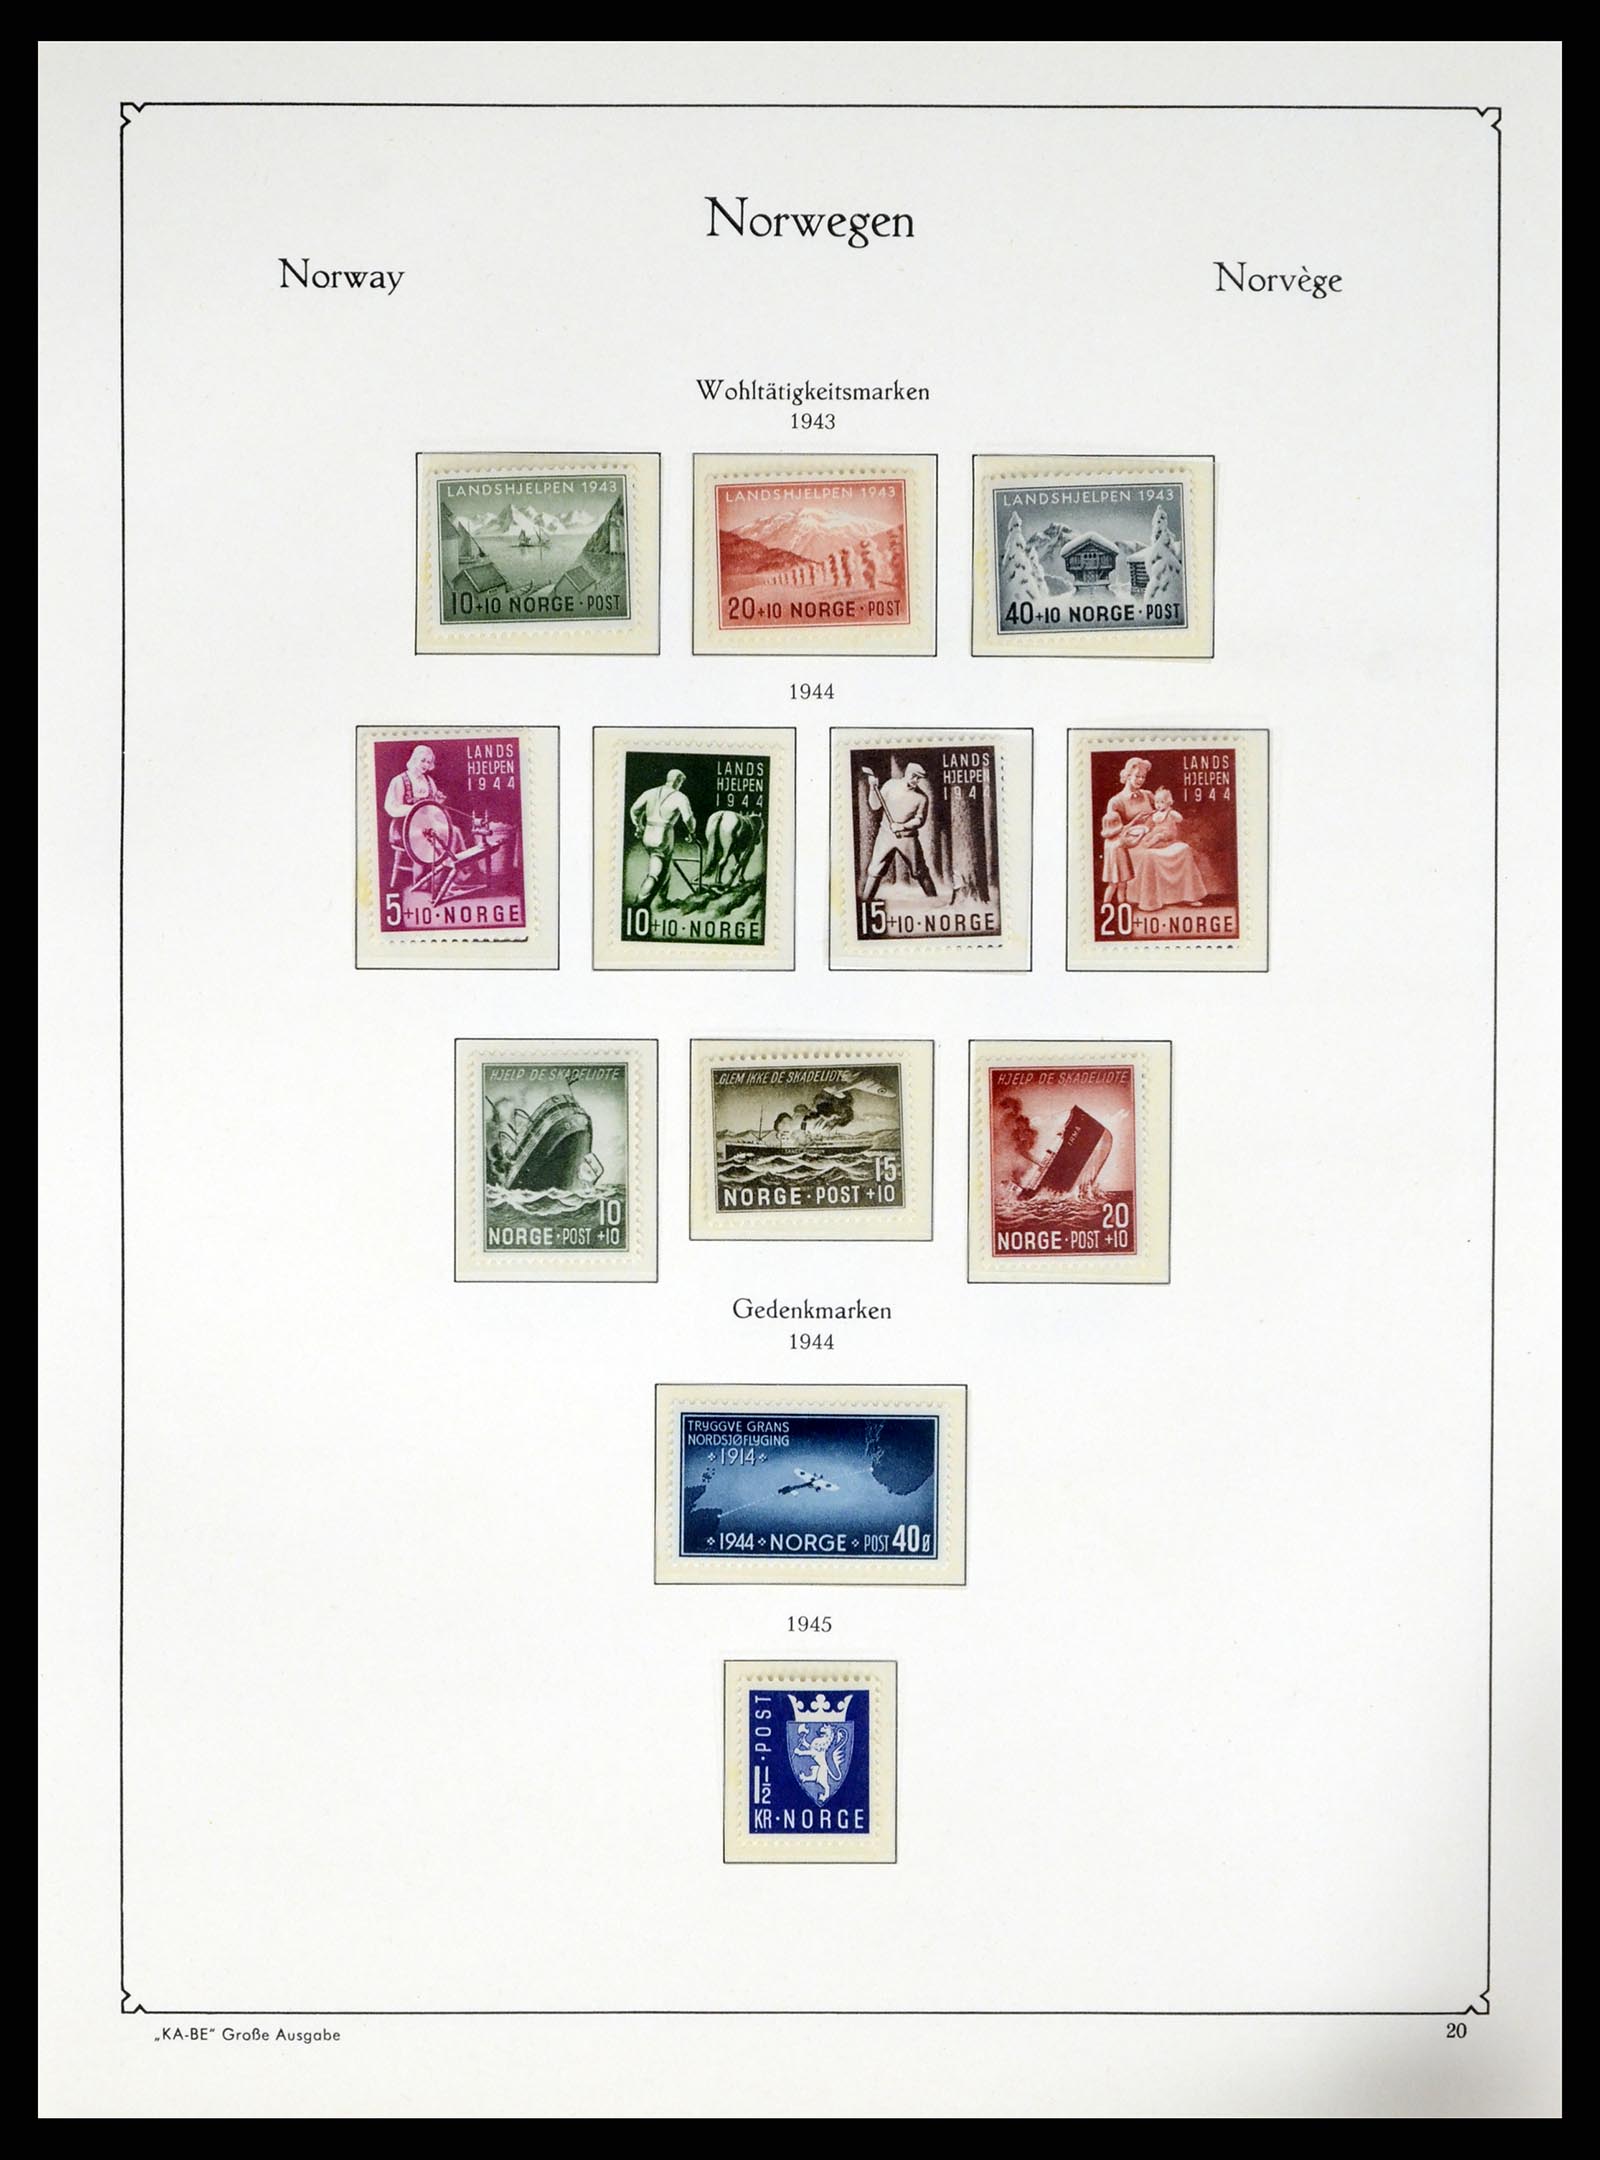 37788 024 - Stamp Collection 37788 Norway 1855-2006.